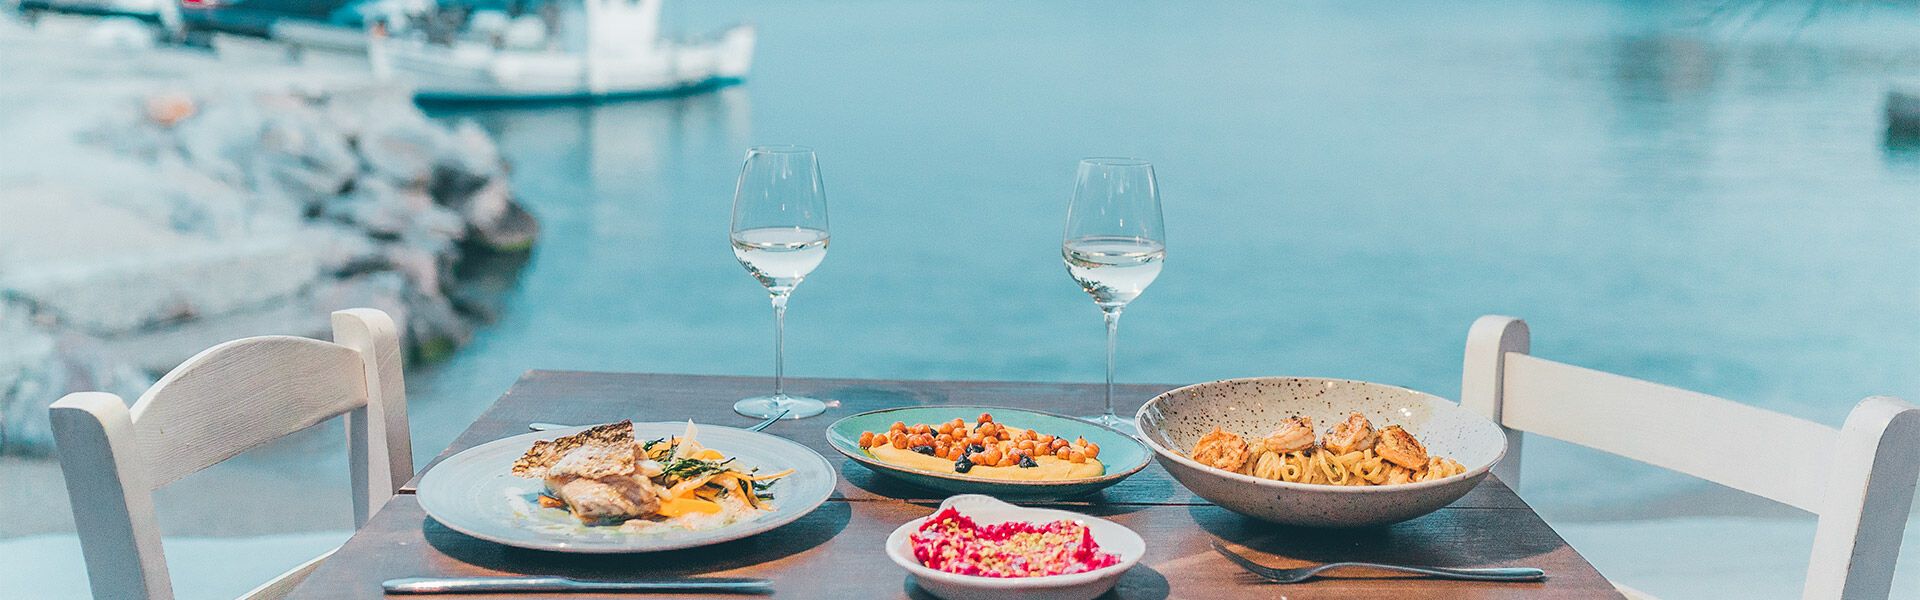 Taste the local specialties accompanied by a glass for white wine